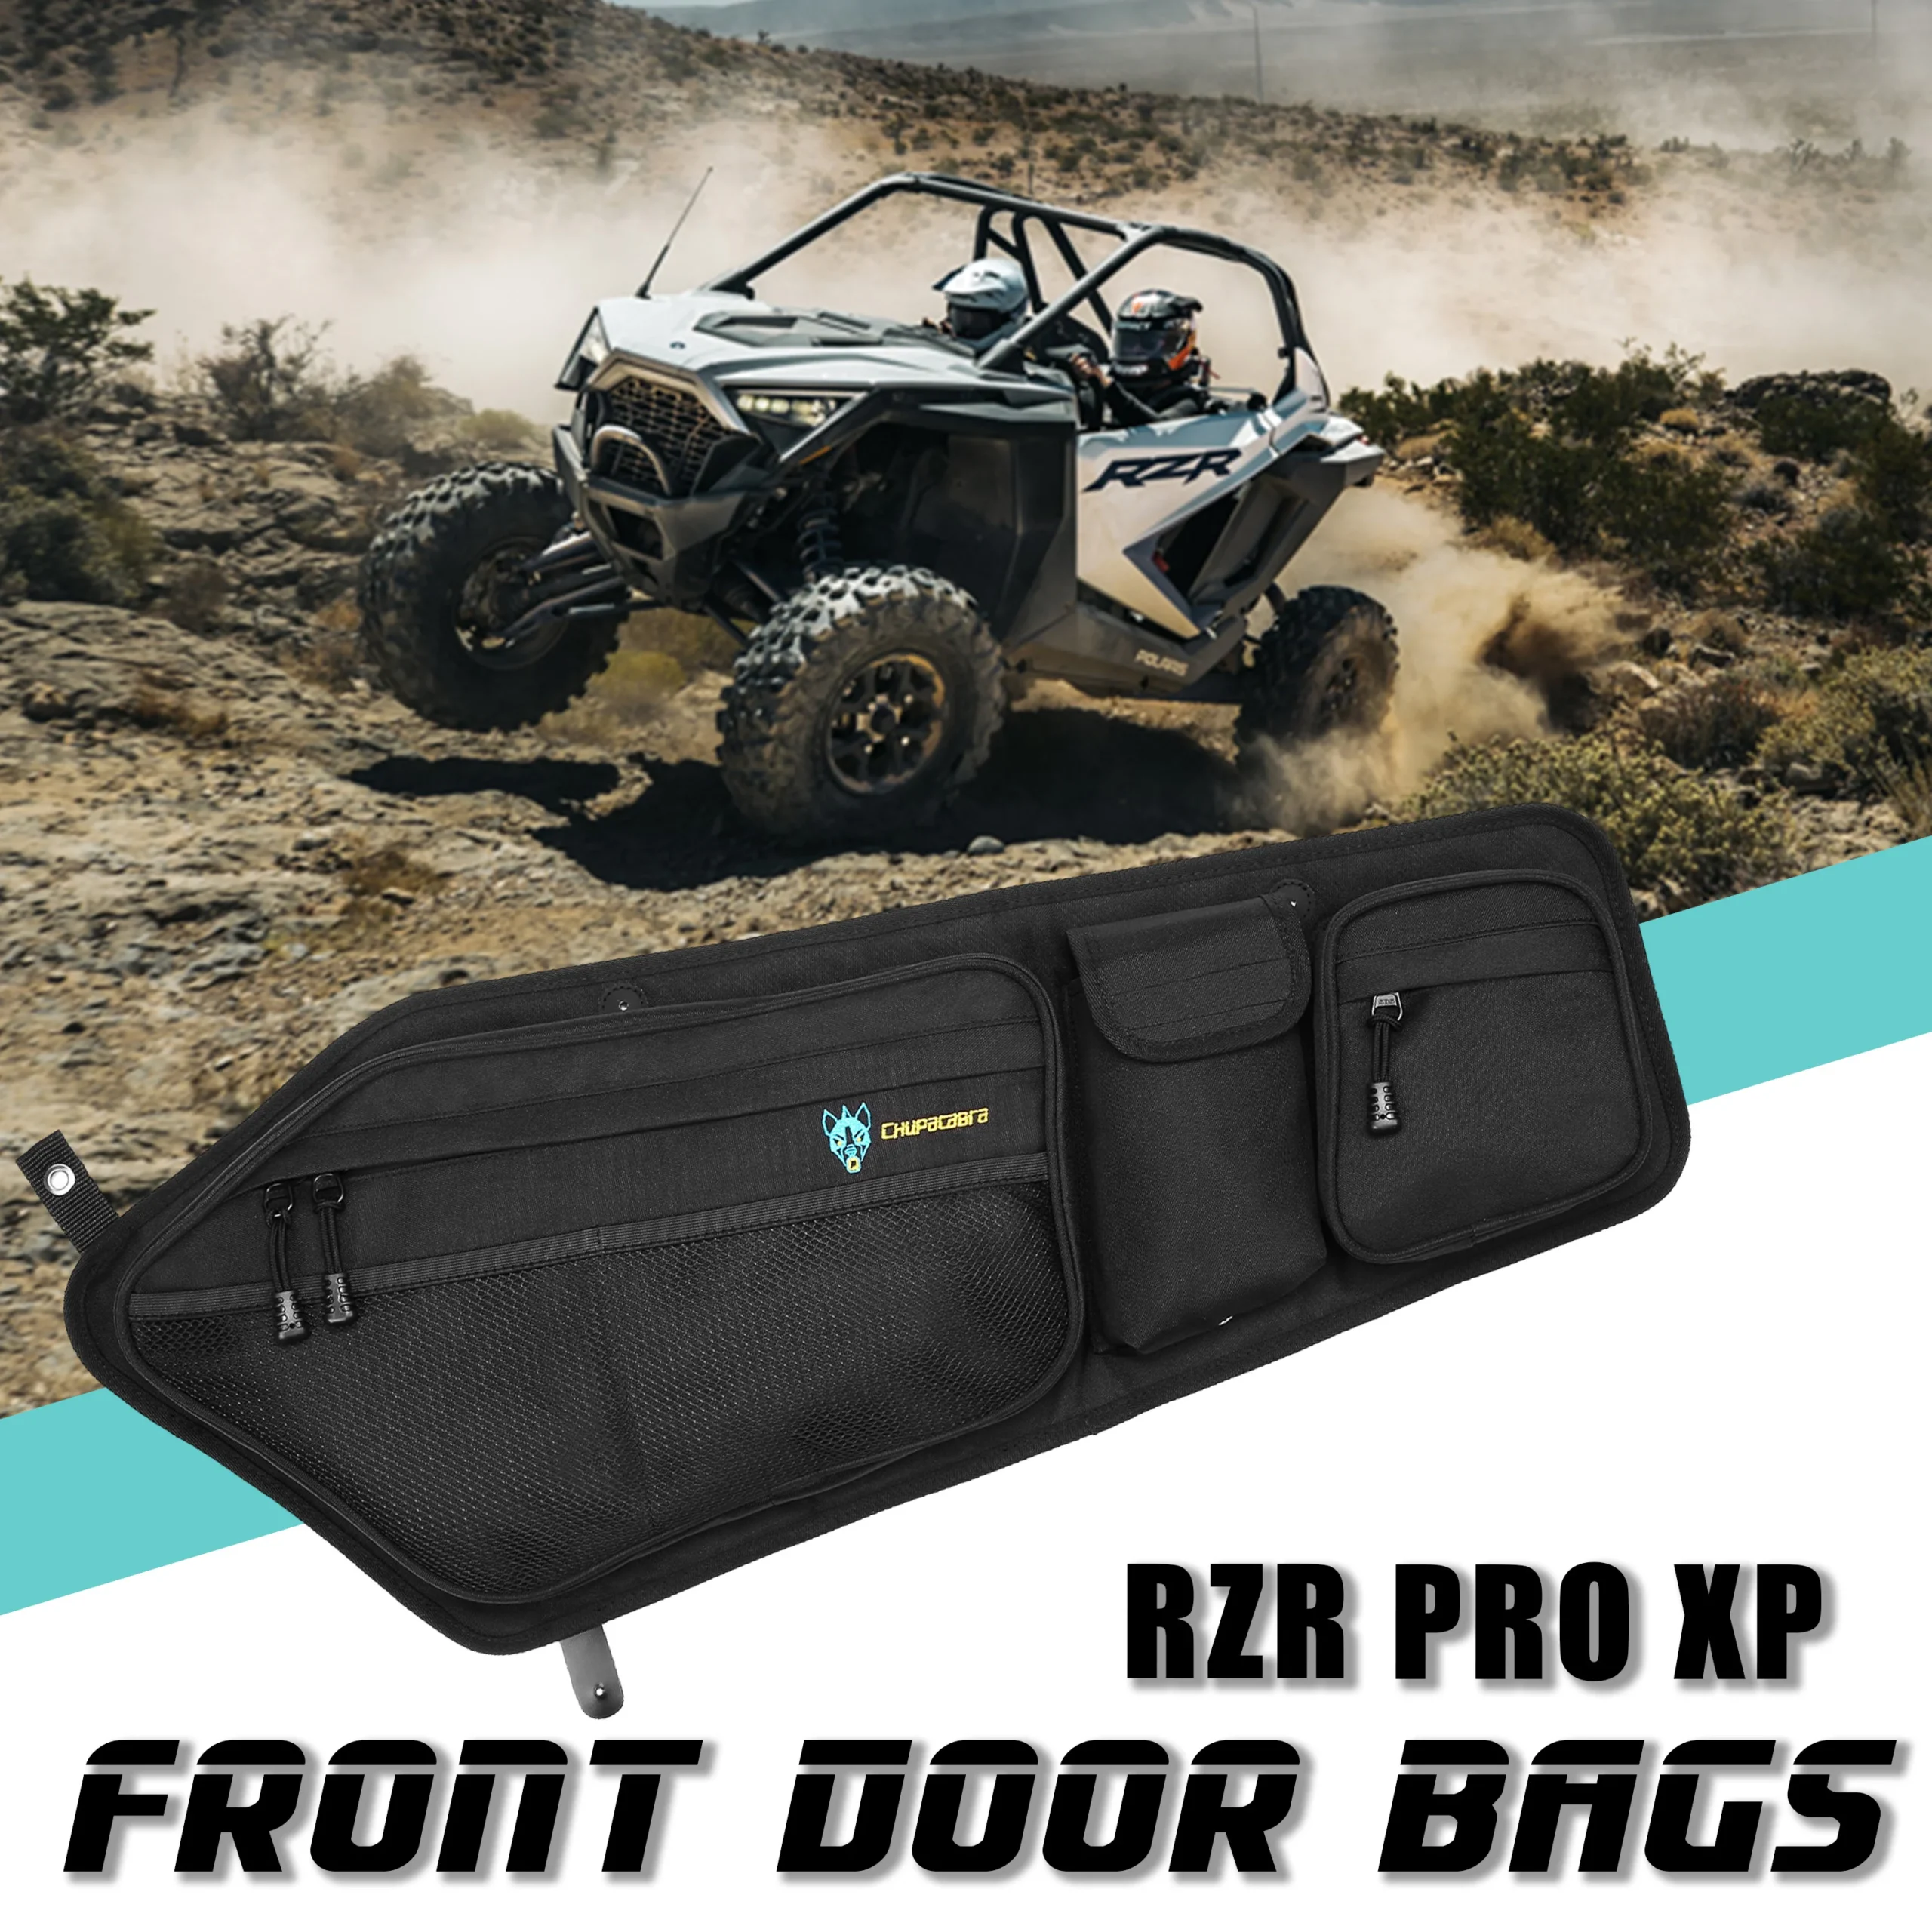 Chupacabra Offroad RZR Pro XP Pro R Door Bags 19 scaled